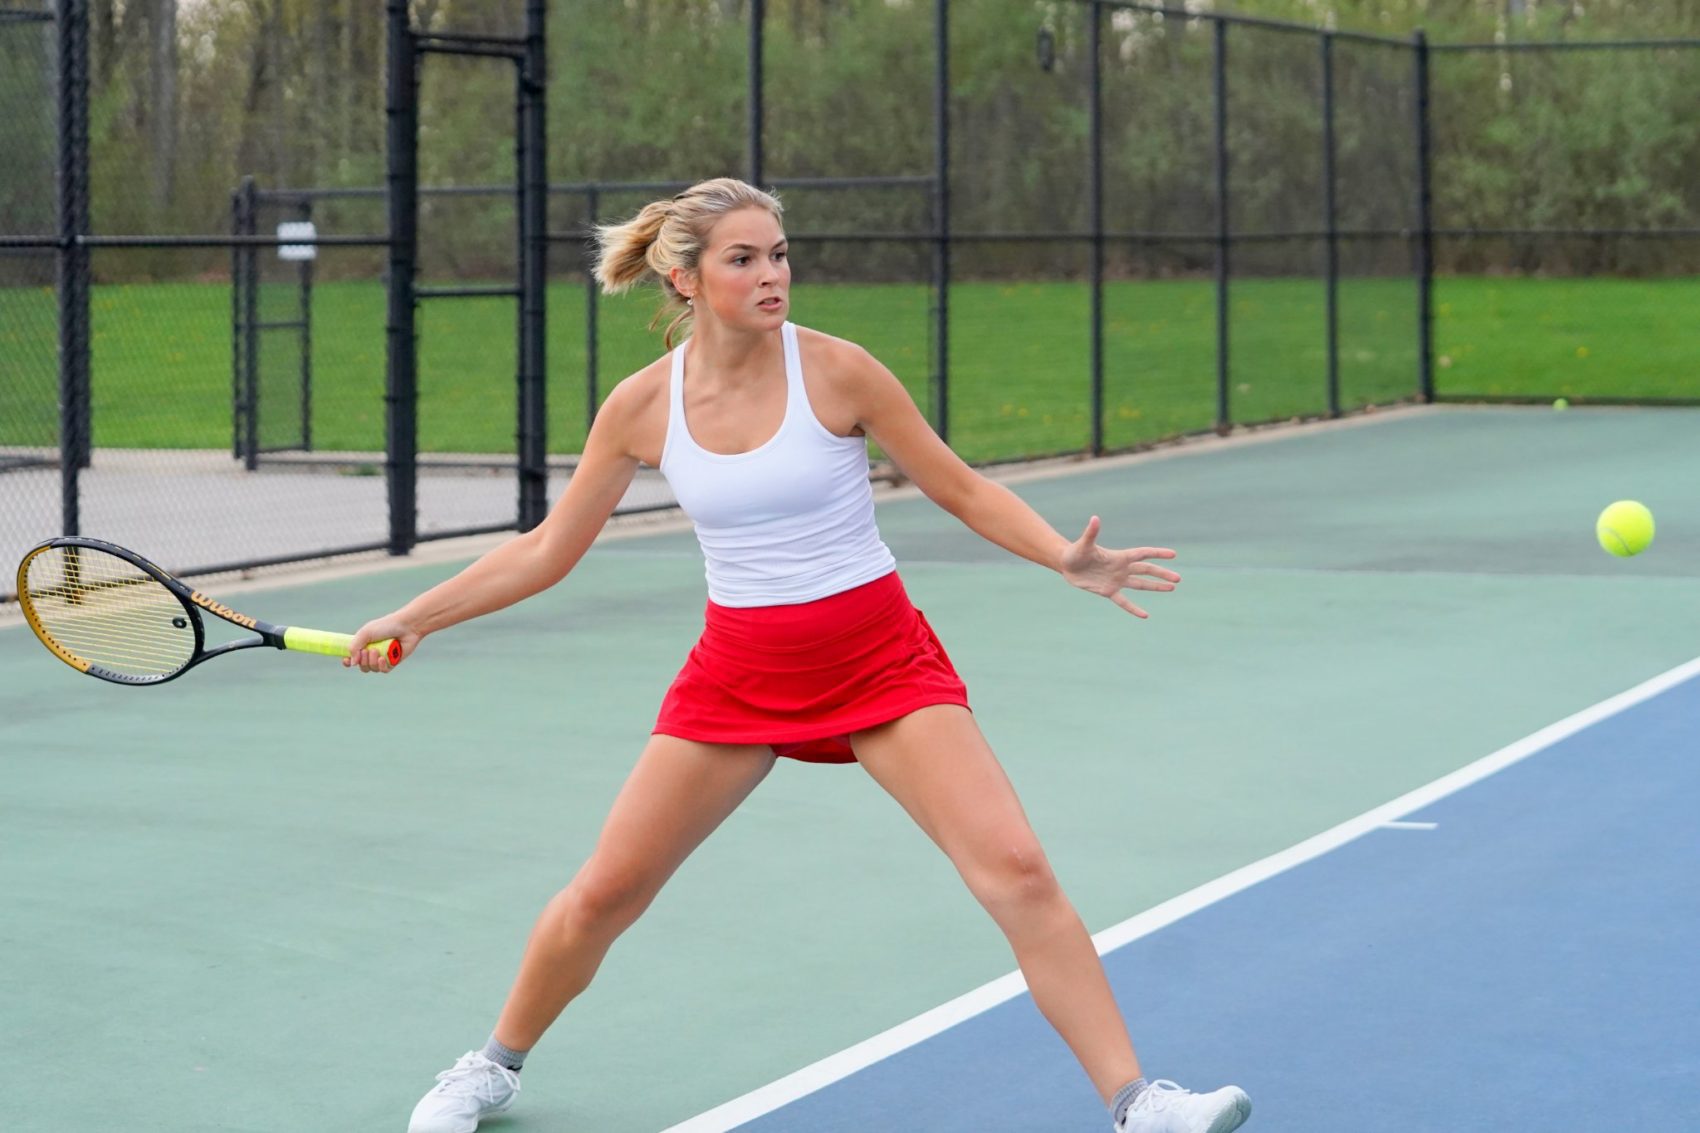 Whitehall and Spring Lake play to a draw in girls local tennis action on Wednesday